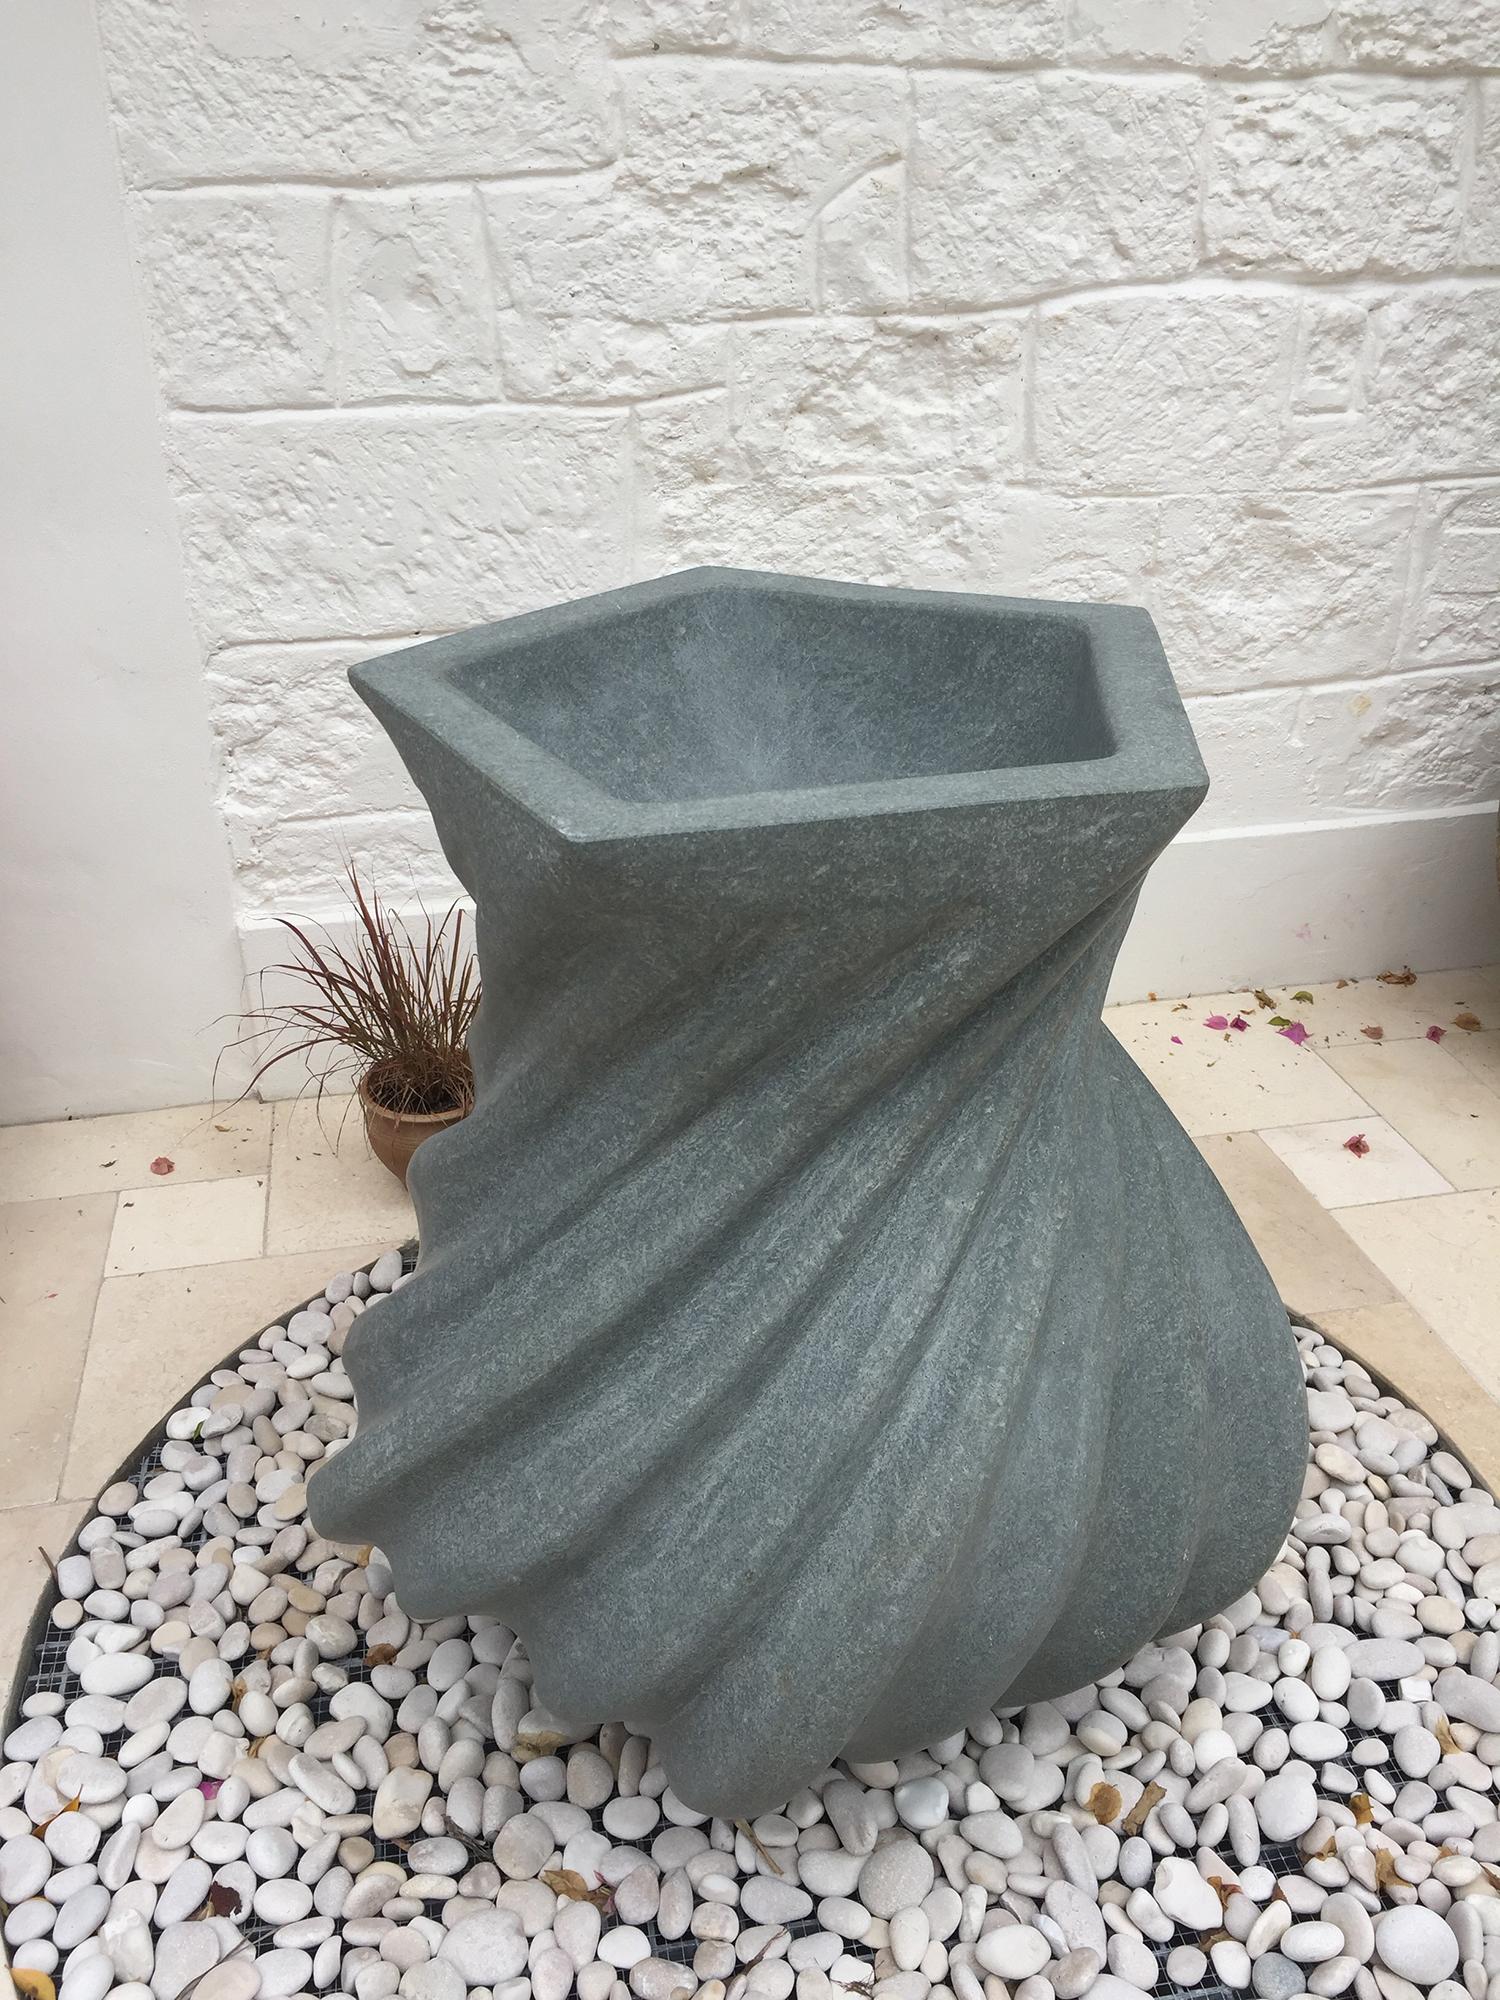 Pentagonal fluted fountain
36x44
Andesite